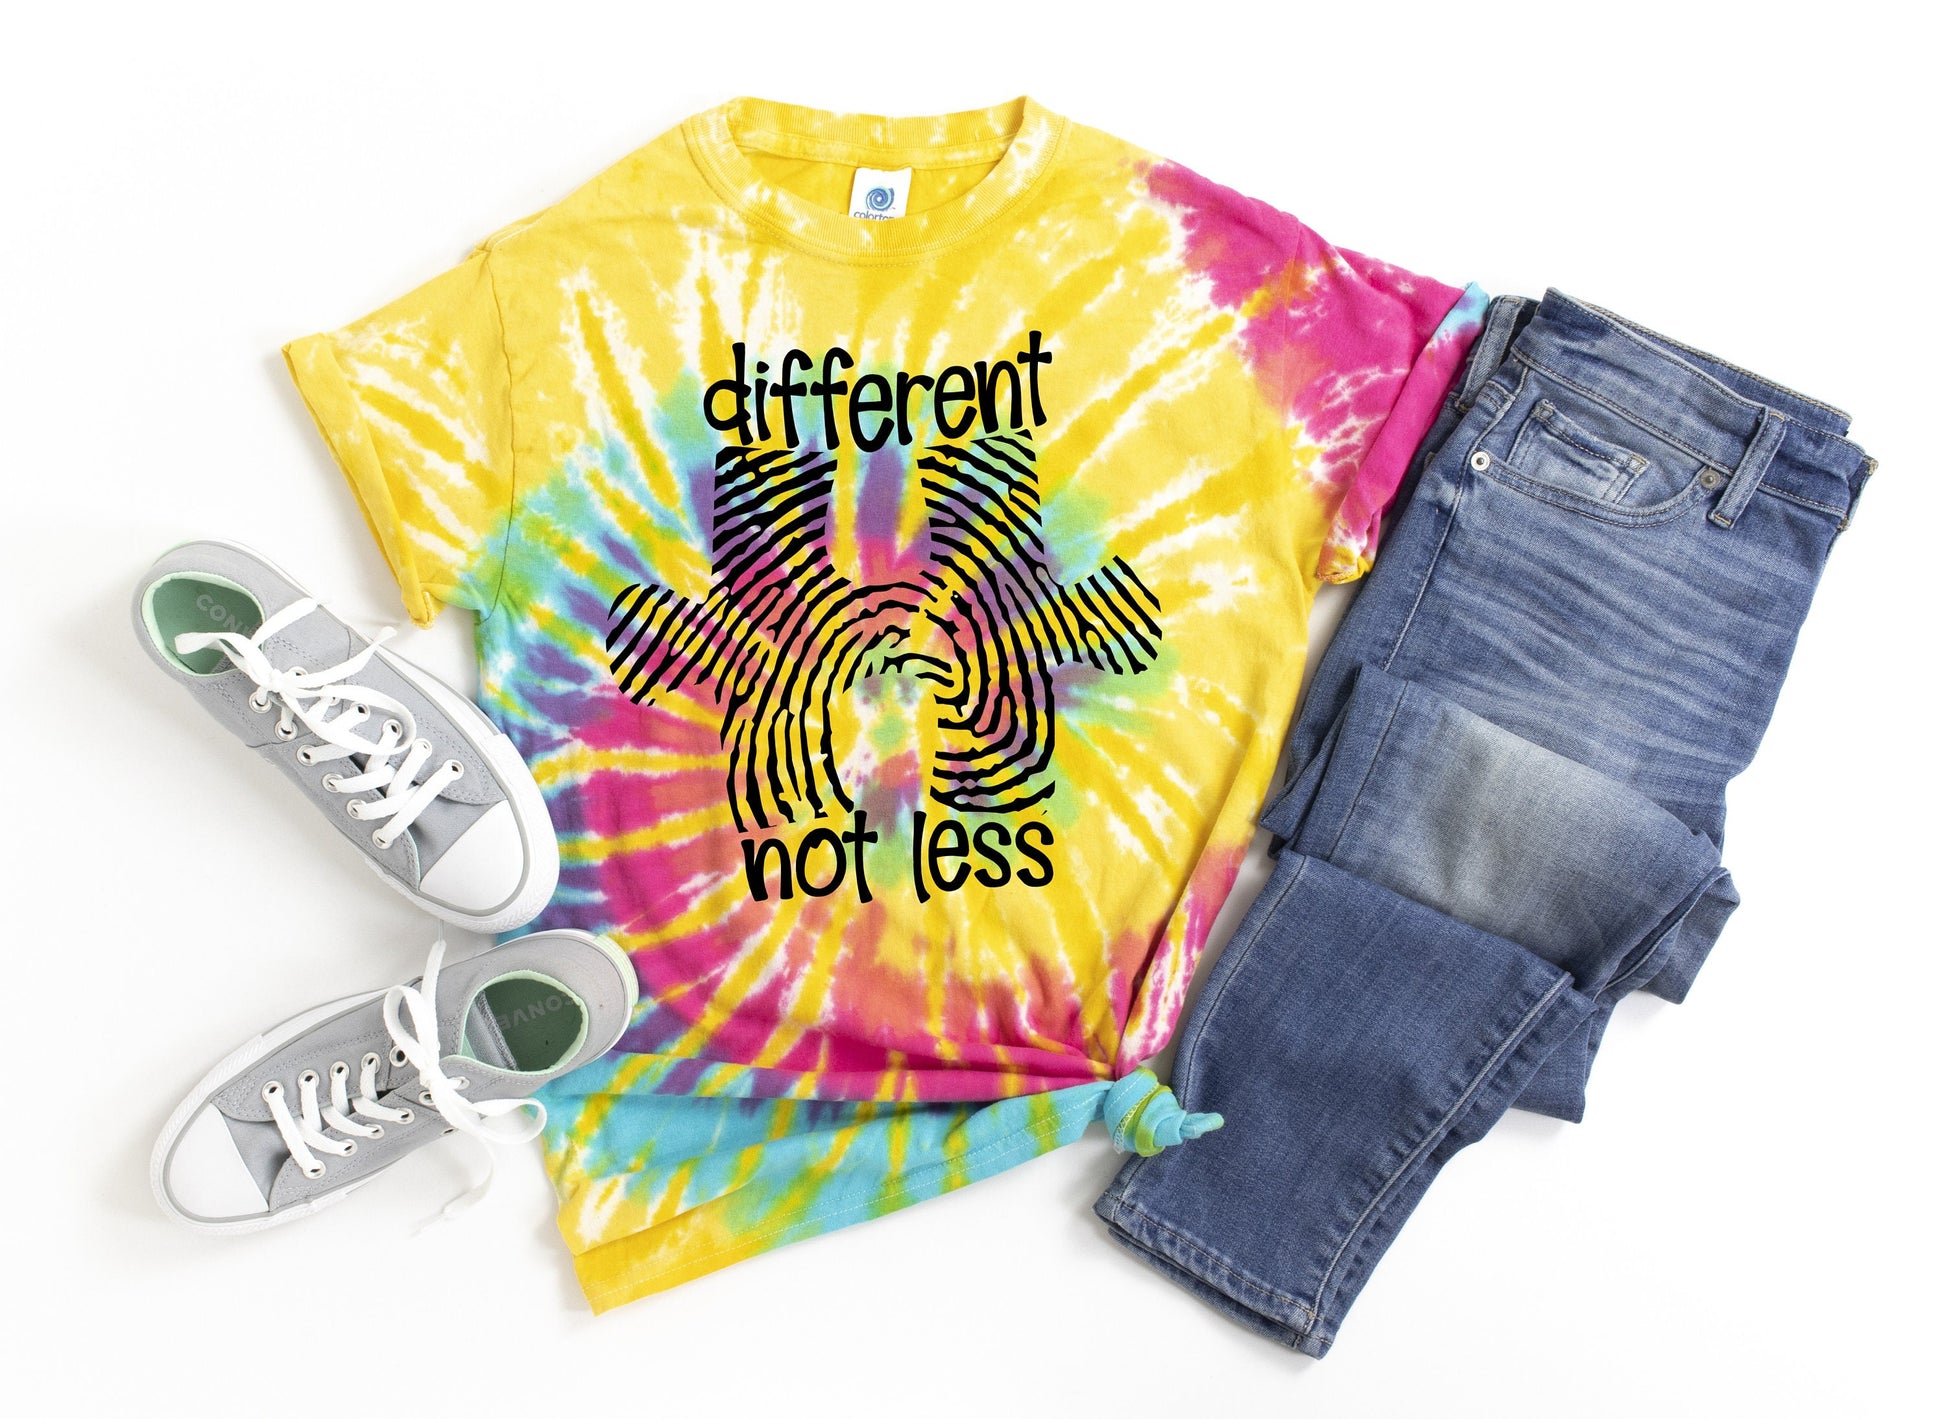 Autism Different Not Less Tie Dye t-shirt - Kids and Adults Sizes - Autism Mom Shirt - Autism Awareness - Autism Support - Autism Kids Shirt